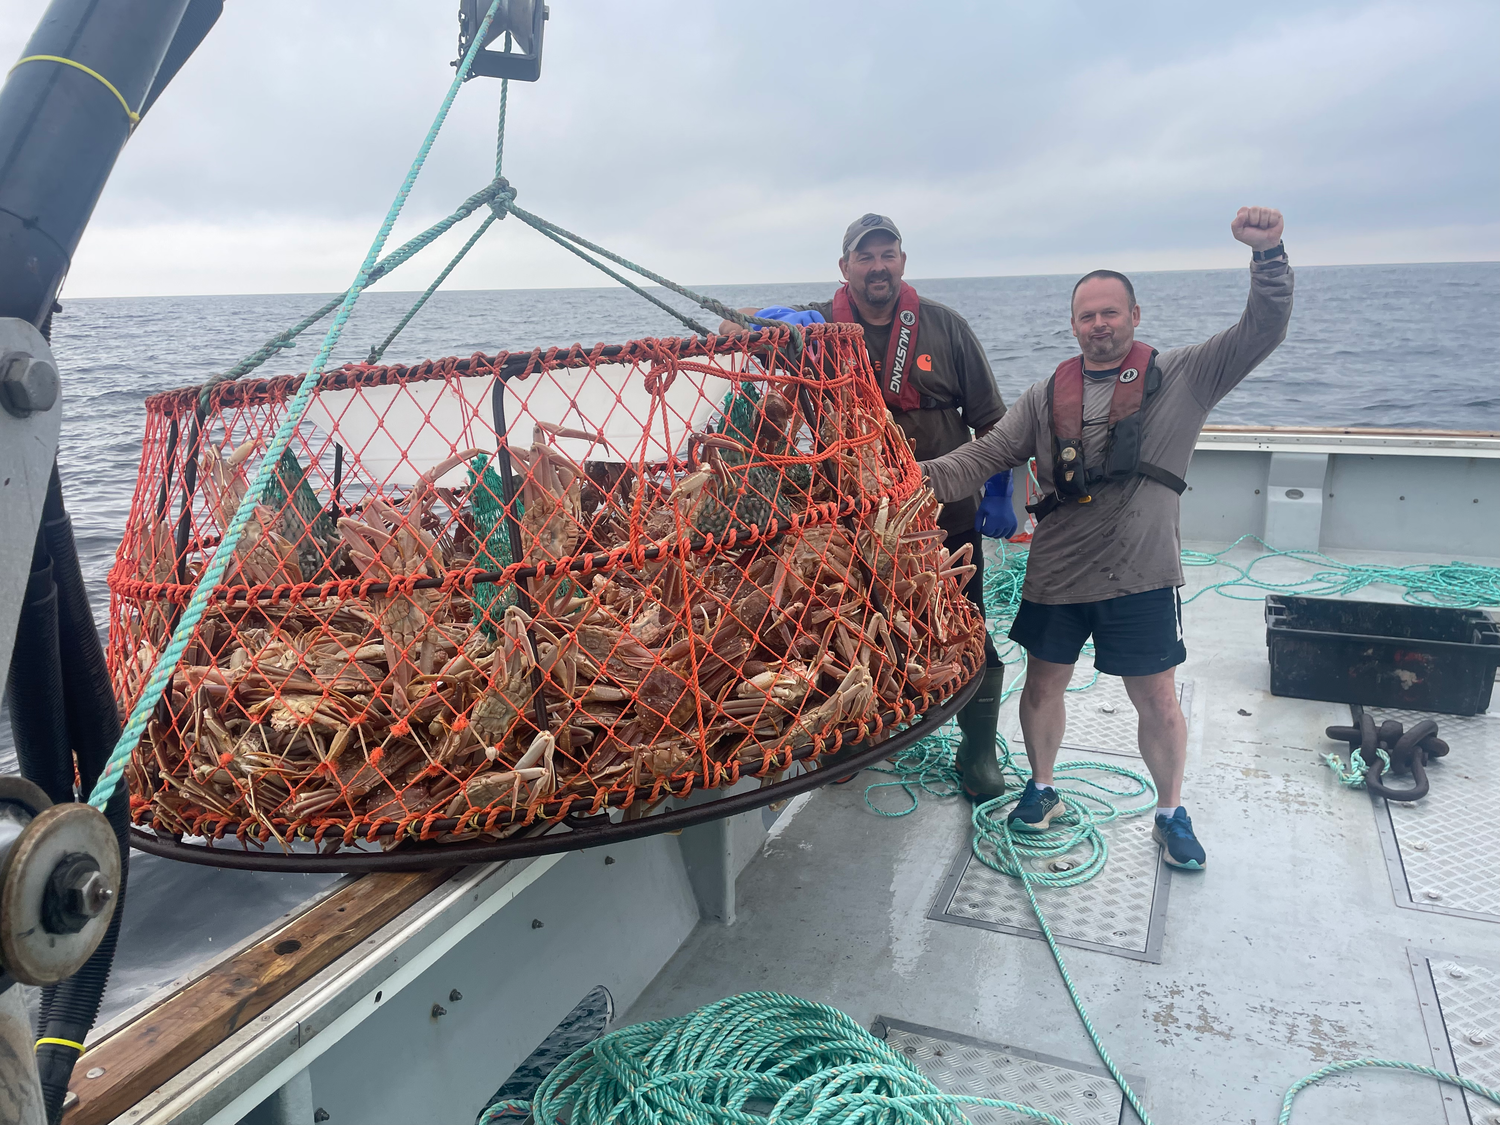 The Story Behind 1,000 lbs of Crab Caught in Zone 19 (Closed due to No